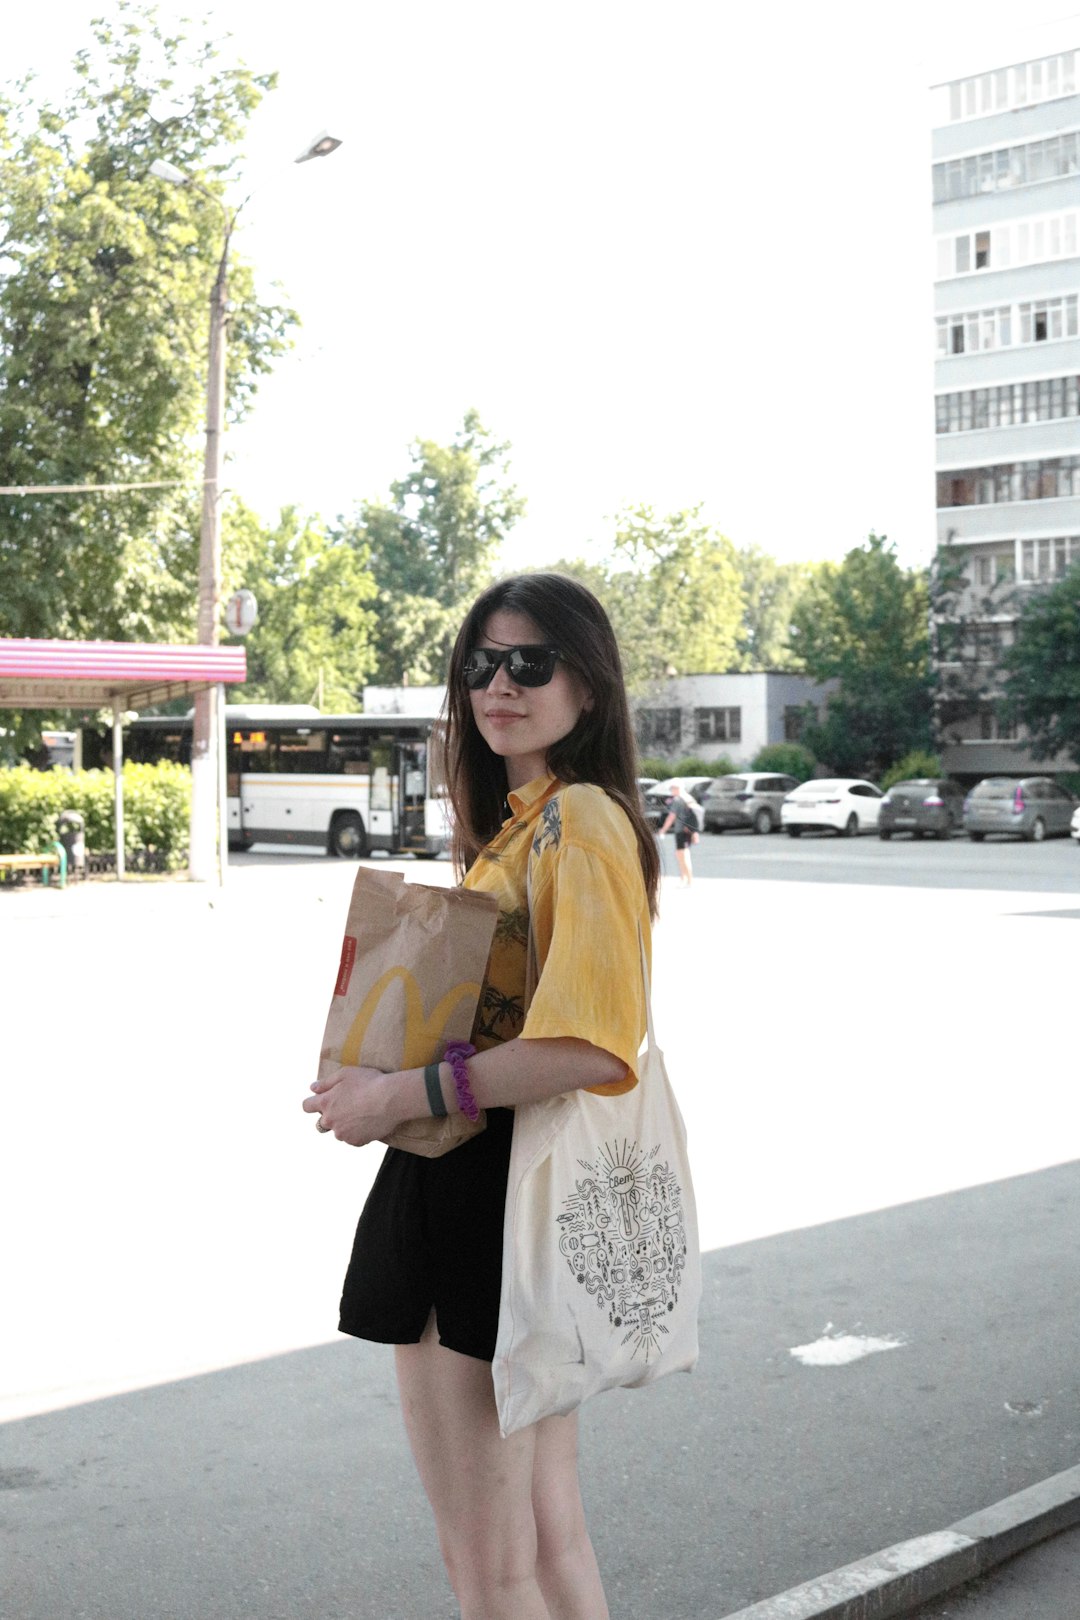 woman in yellow long sleeve shirt and black pants holding pink and white tote bag